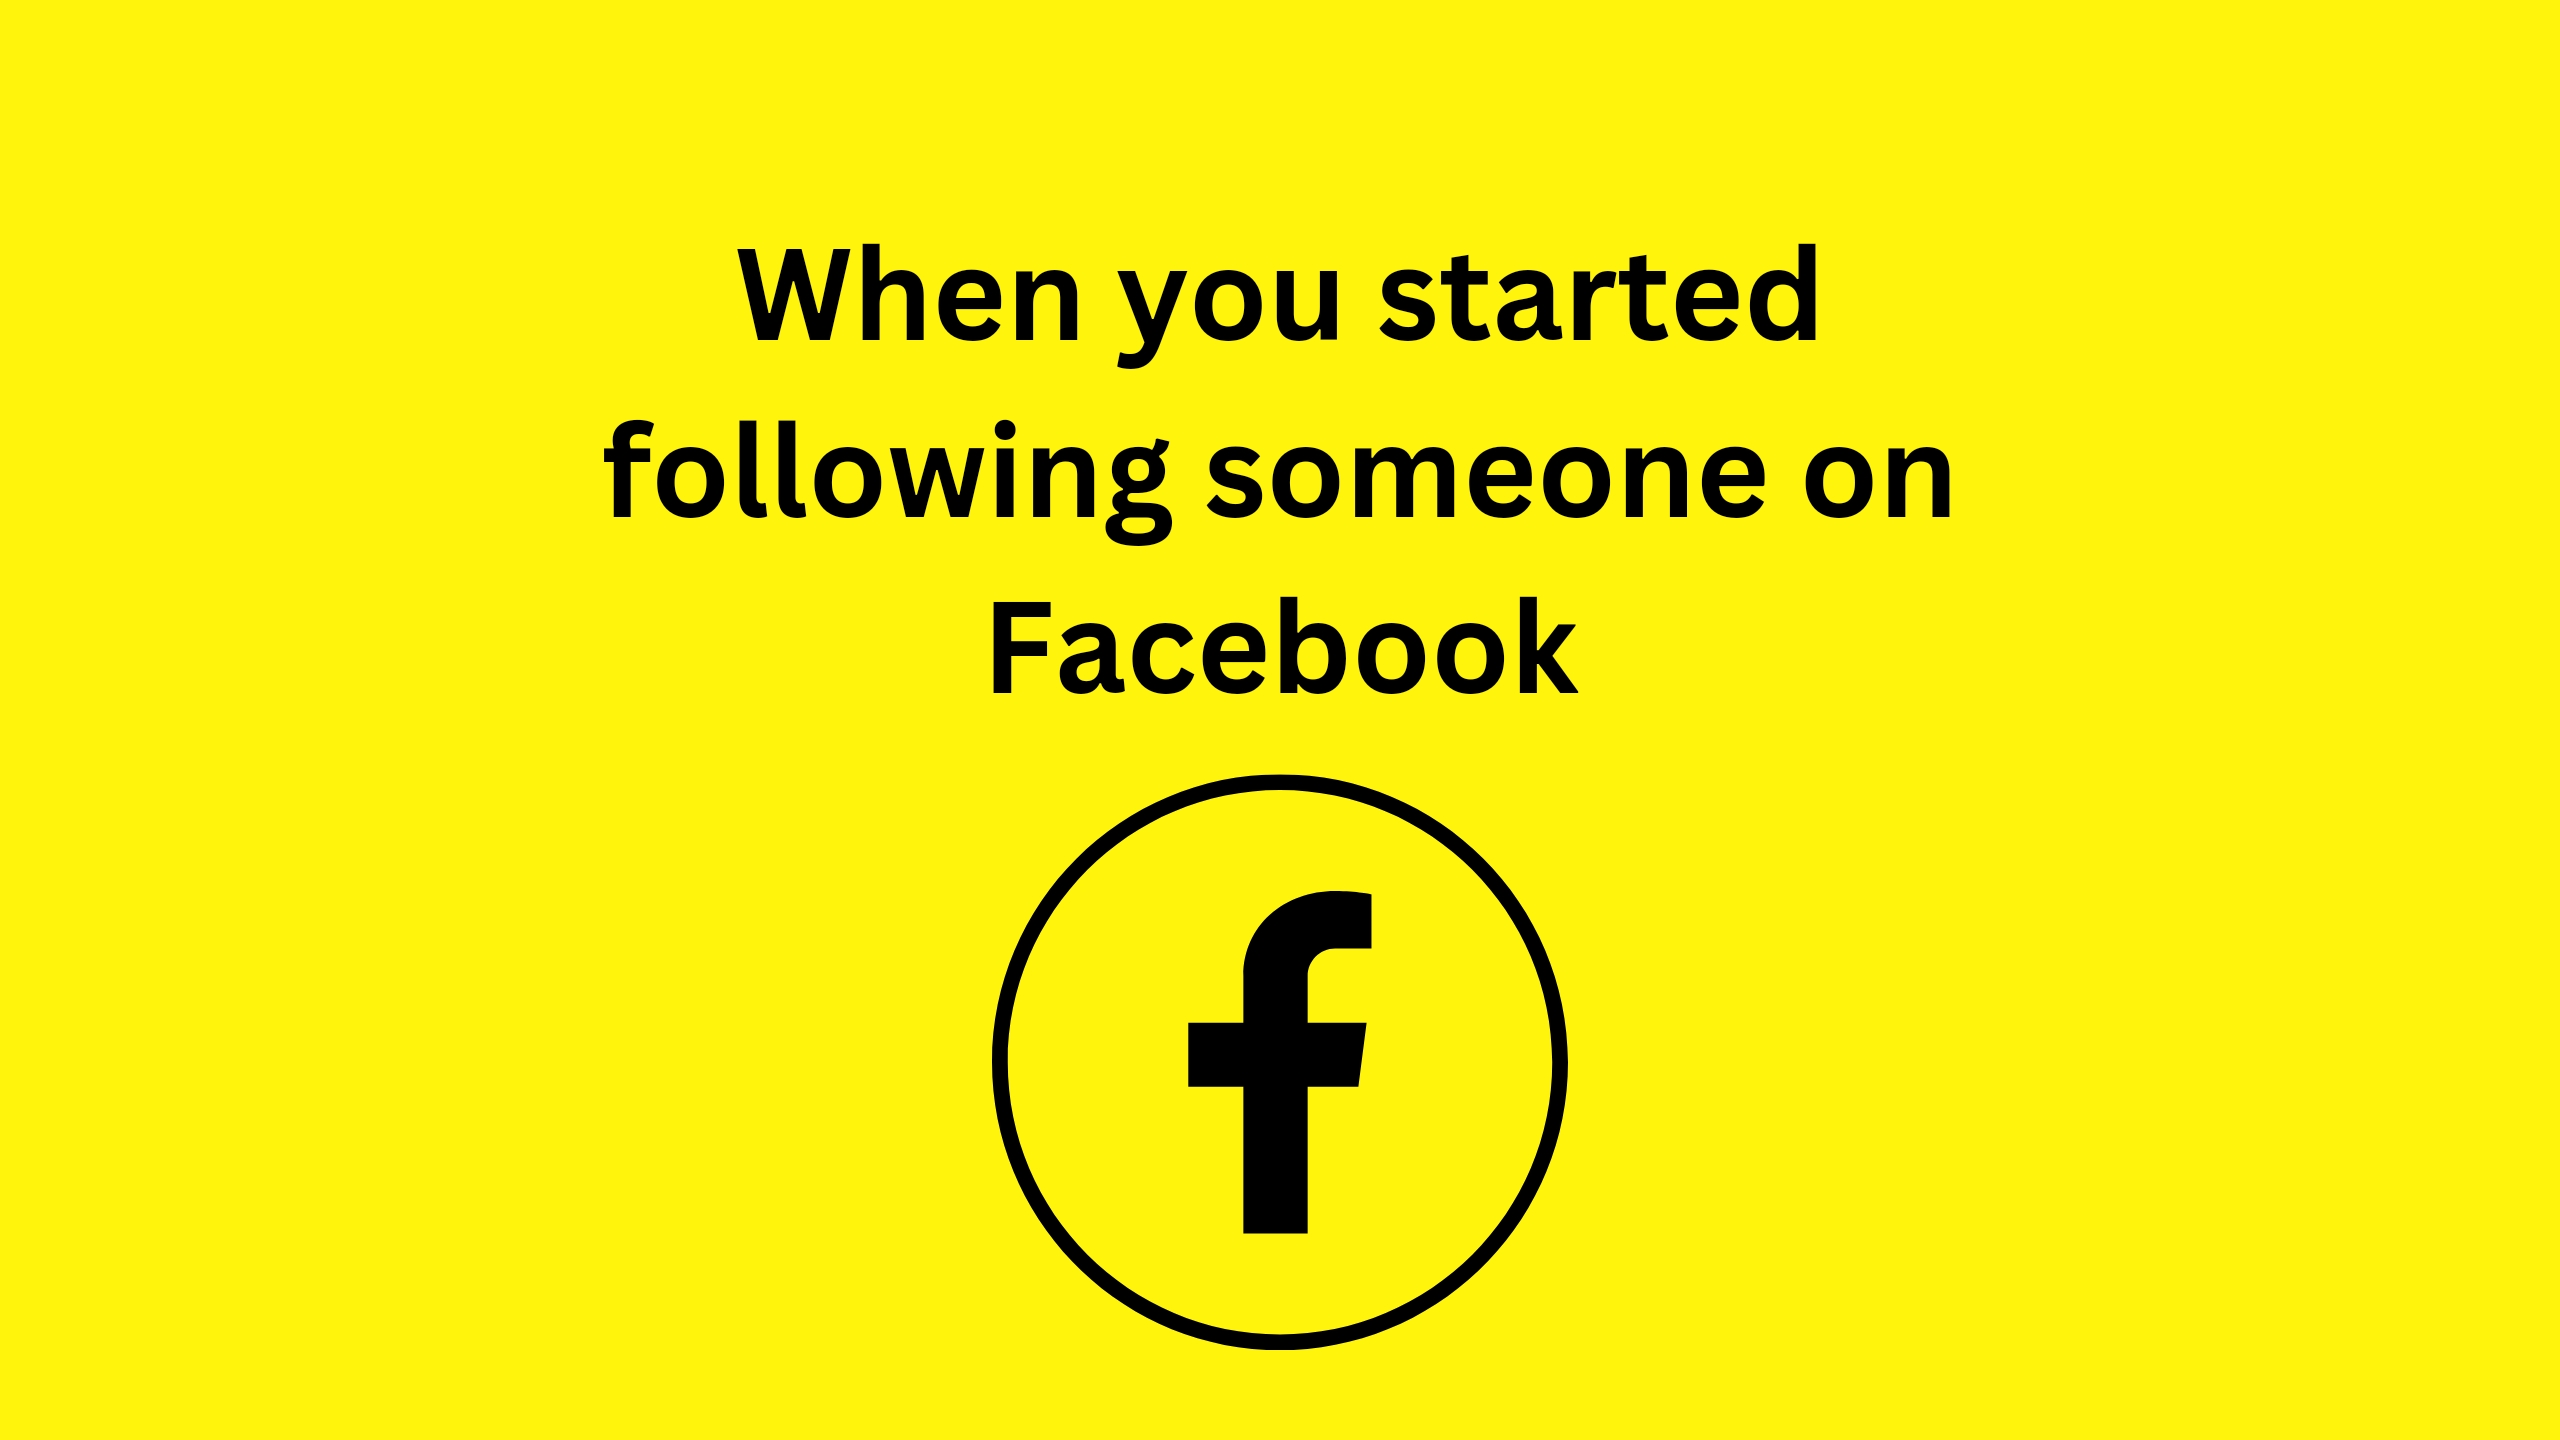 when i started following someone on Facebook